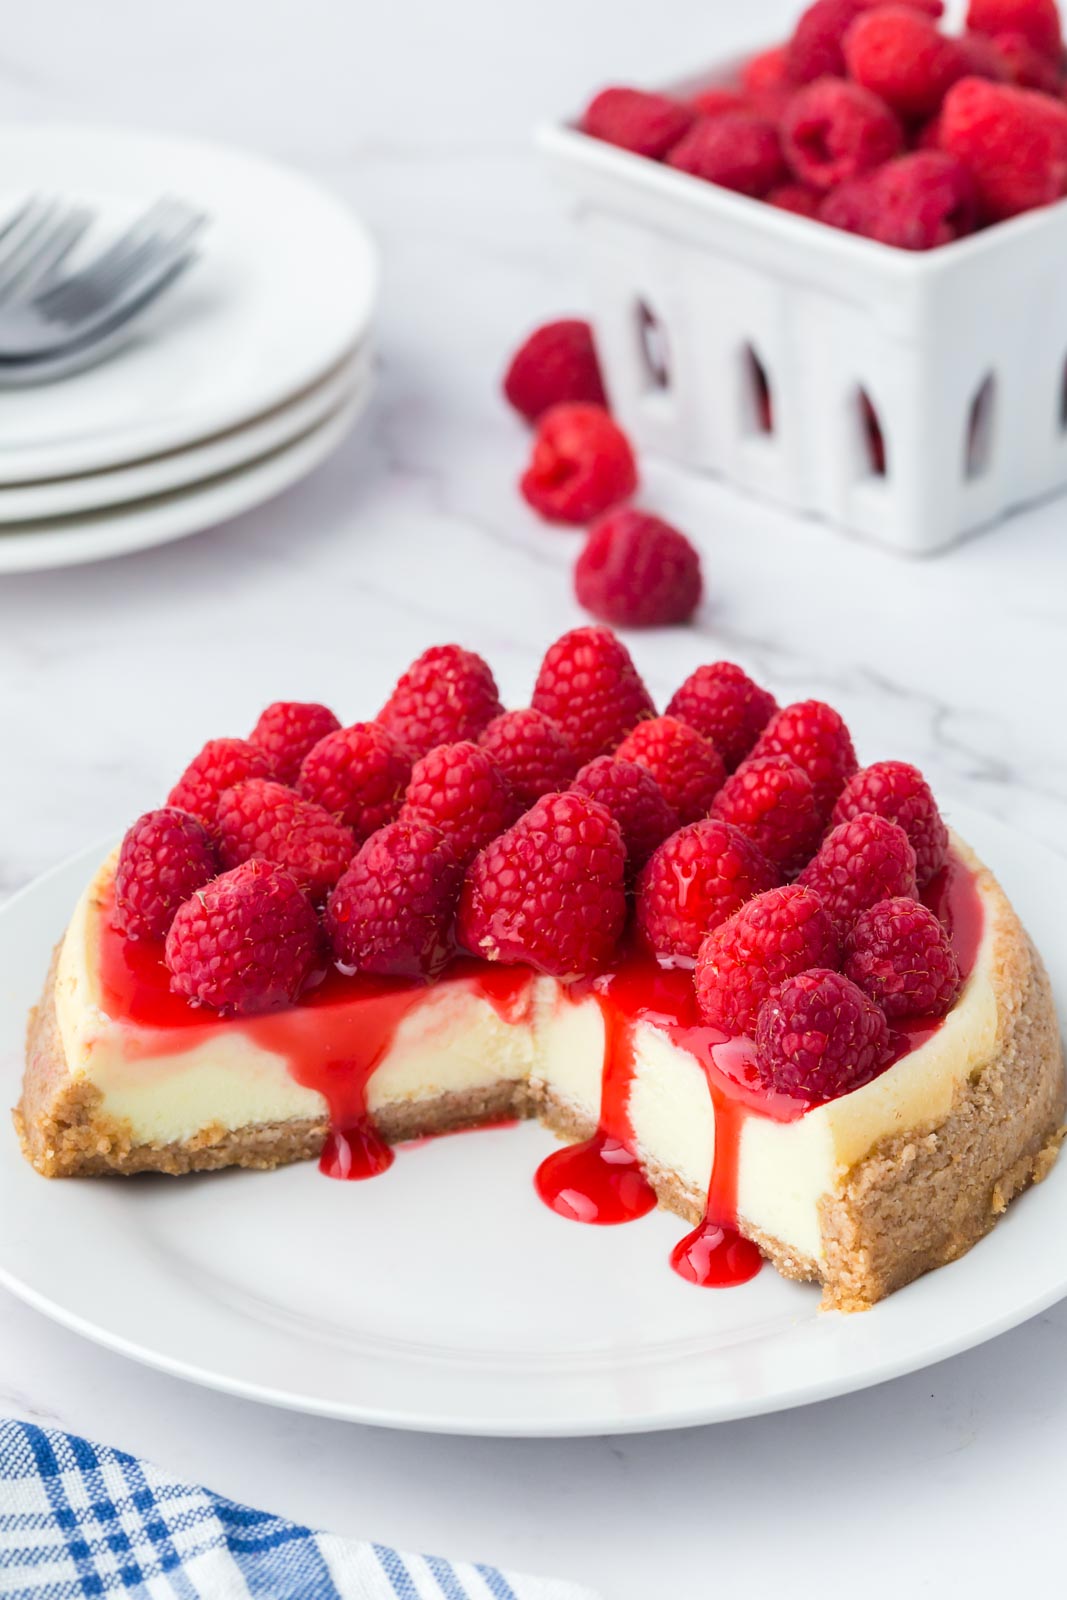 Raspberry cheesecake with a couple of slices taken out of it.